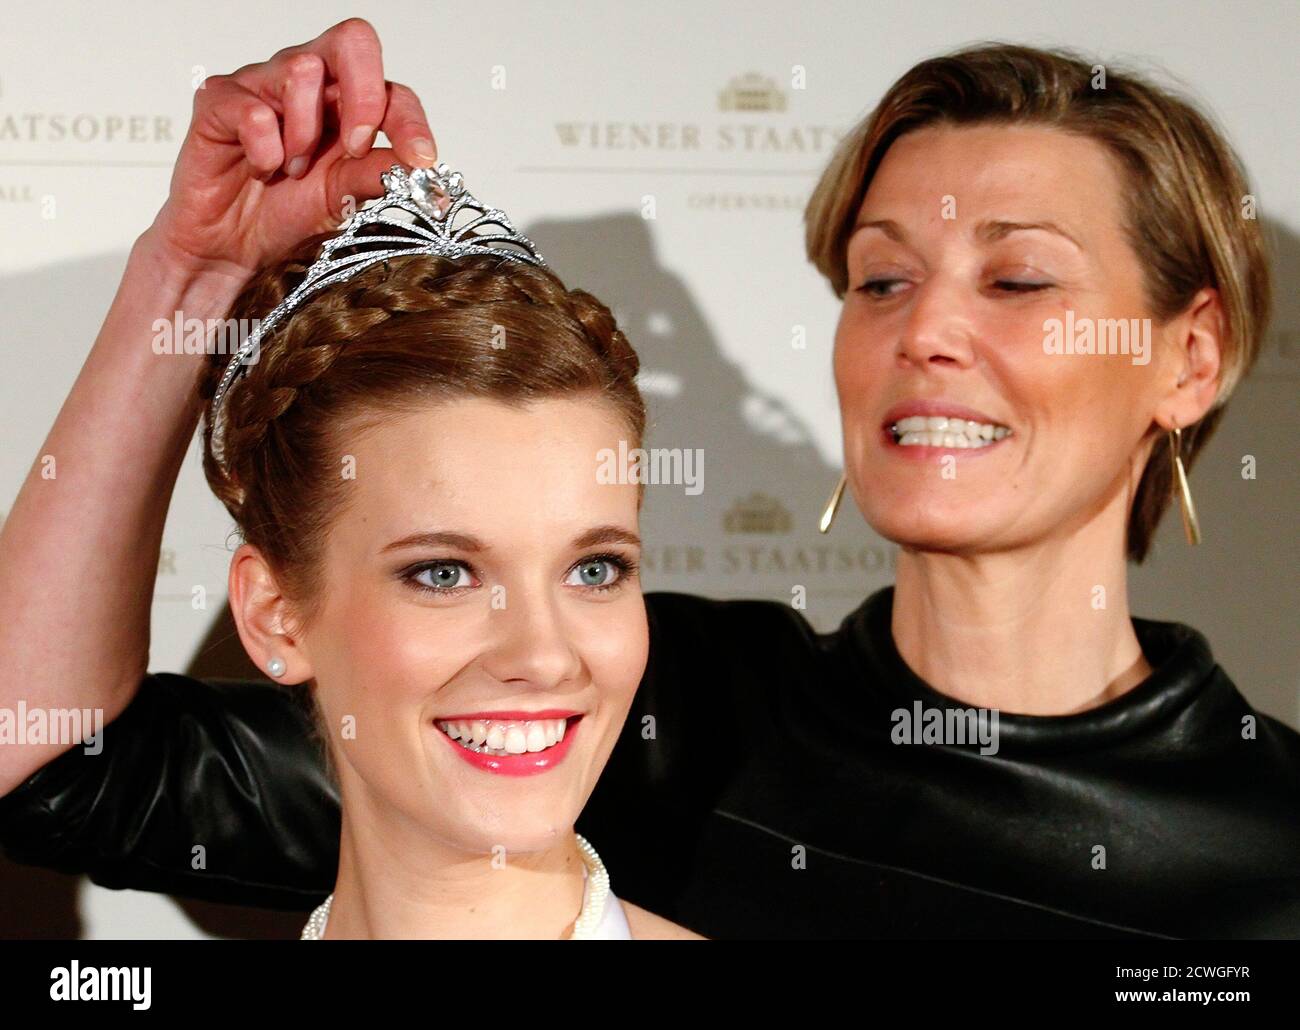 Opera Ball organizer Desiree Treichl-Stuergkh touches the tiara of a  debutant during the jewelery presentation in Vienna January 28, 2014. The  traditional Vienna Opera Ball takes place on February 27.  REUTERS/Heinz-Peter Bader (